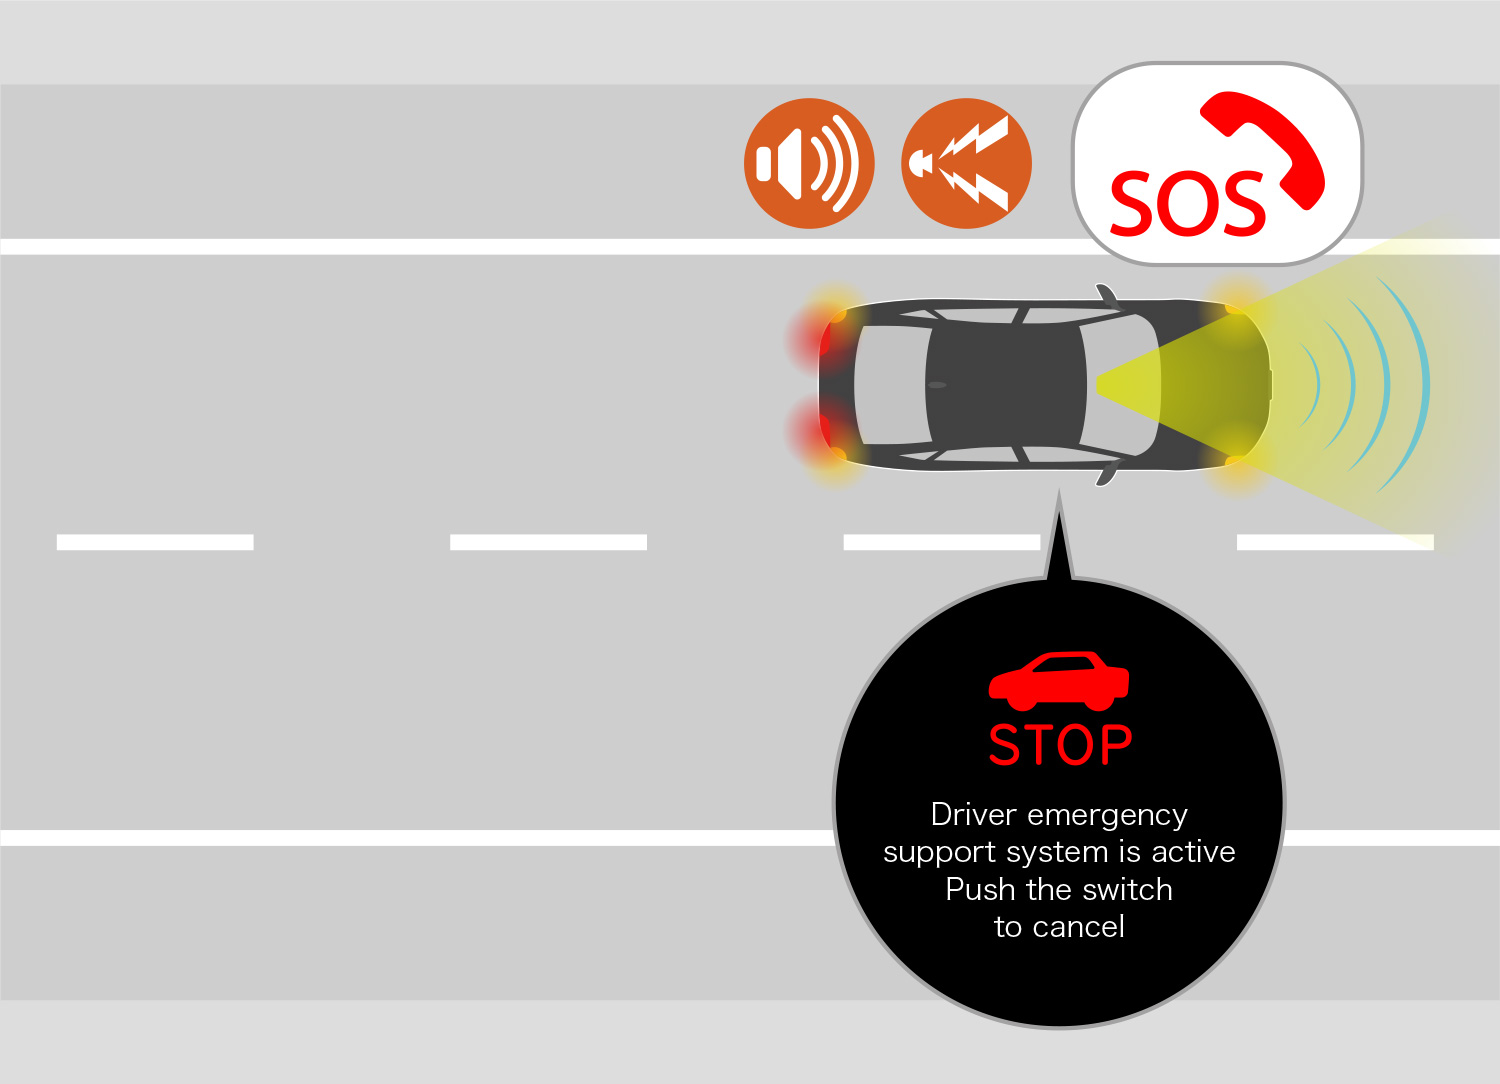 After stopping the vehicle, the system connects to the emergency call center service to request an ambulance or other rescue services.